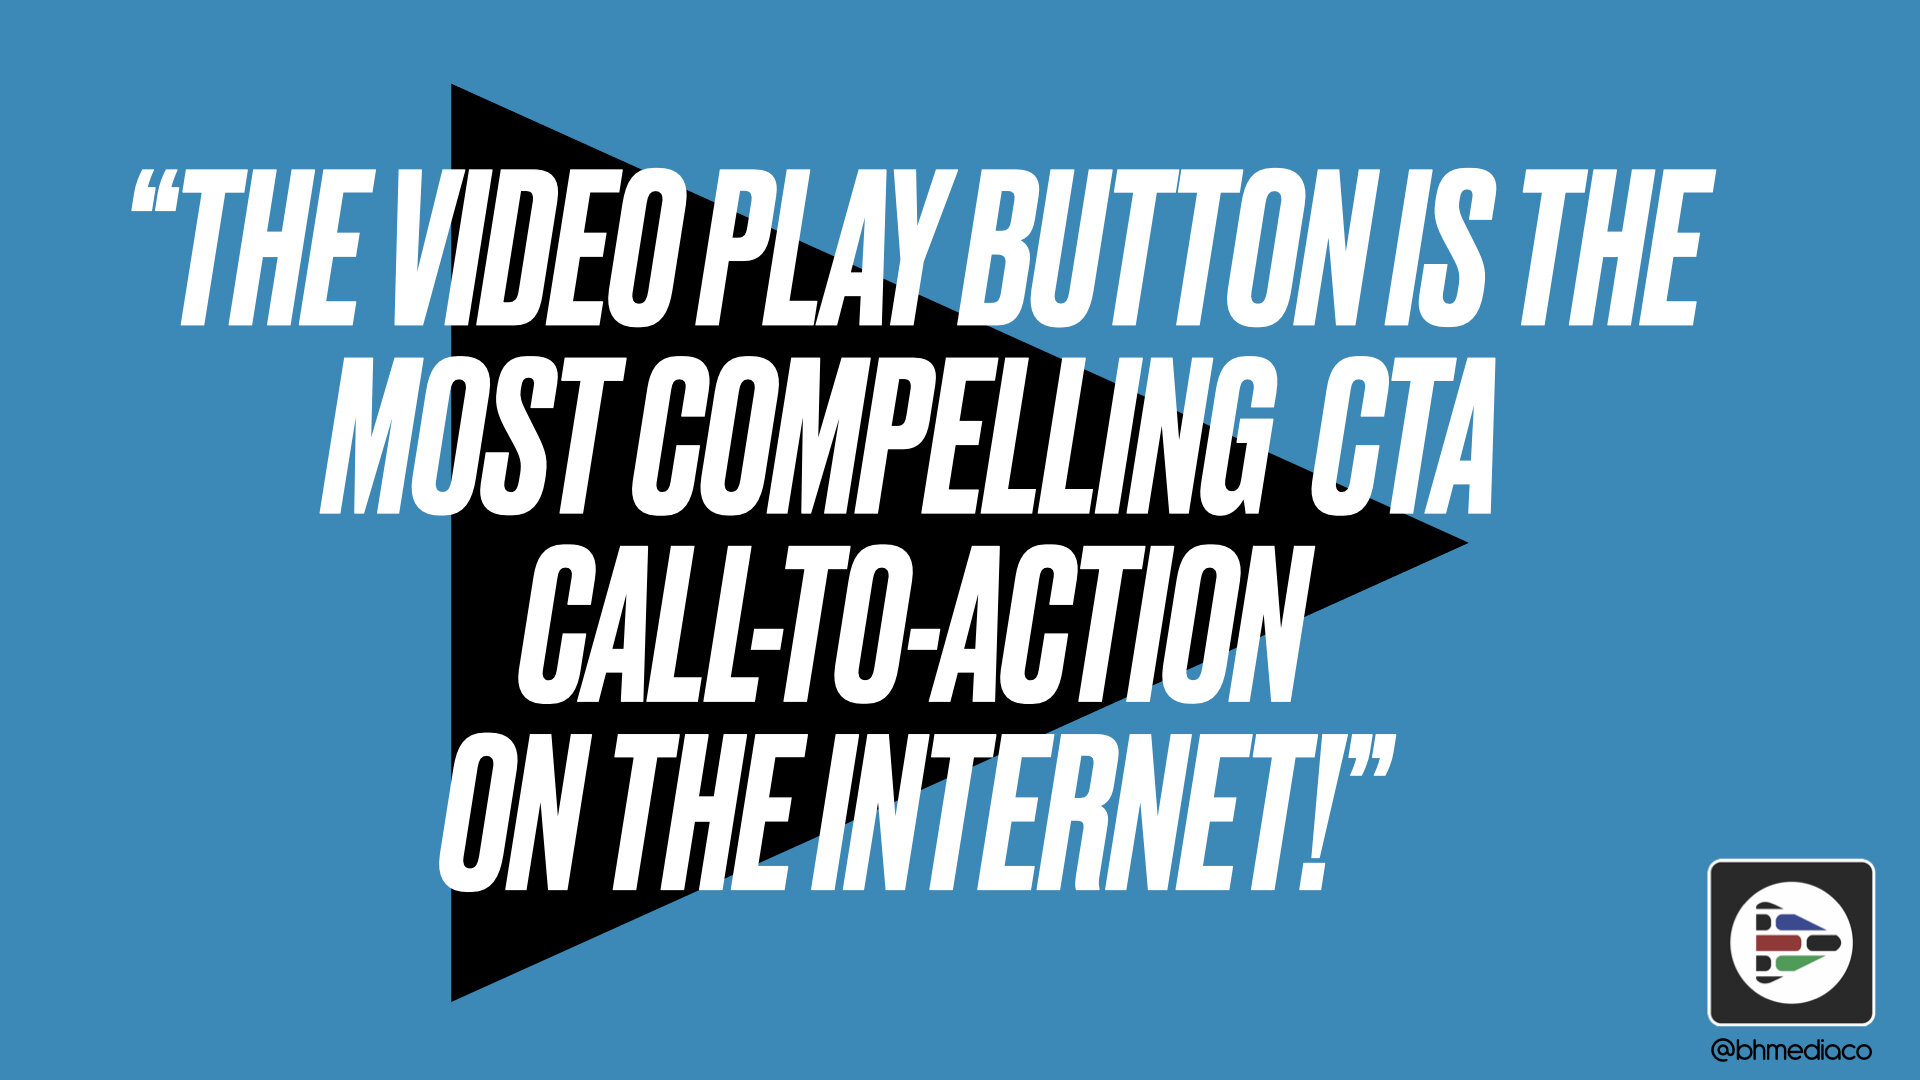 DYK: The Video ▶️ PLAY button is the most compelling action taken on the internet!

Engage with your new and existing followers, talk to them, tell compelling stories, and be sure to post VIDEO!

VCTC Live in #santacruz

#learnvideo #videoproduction 